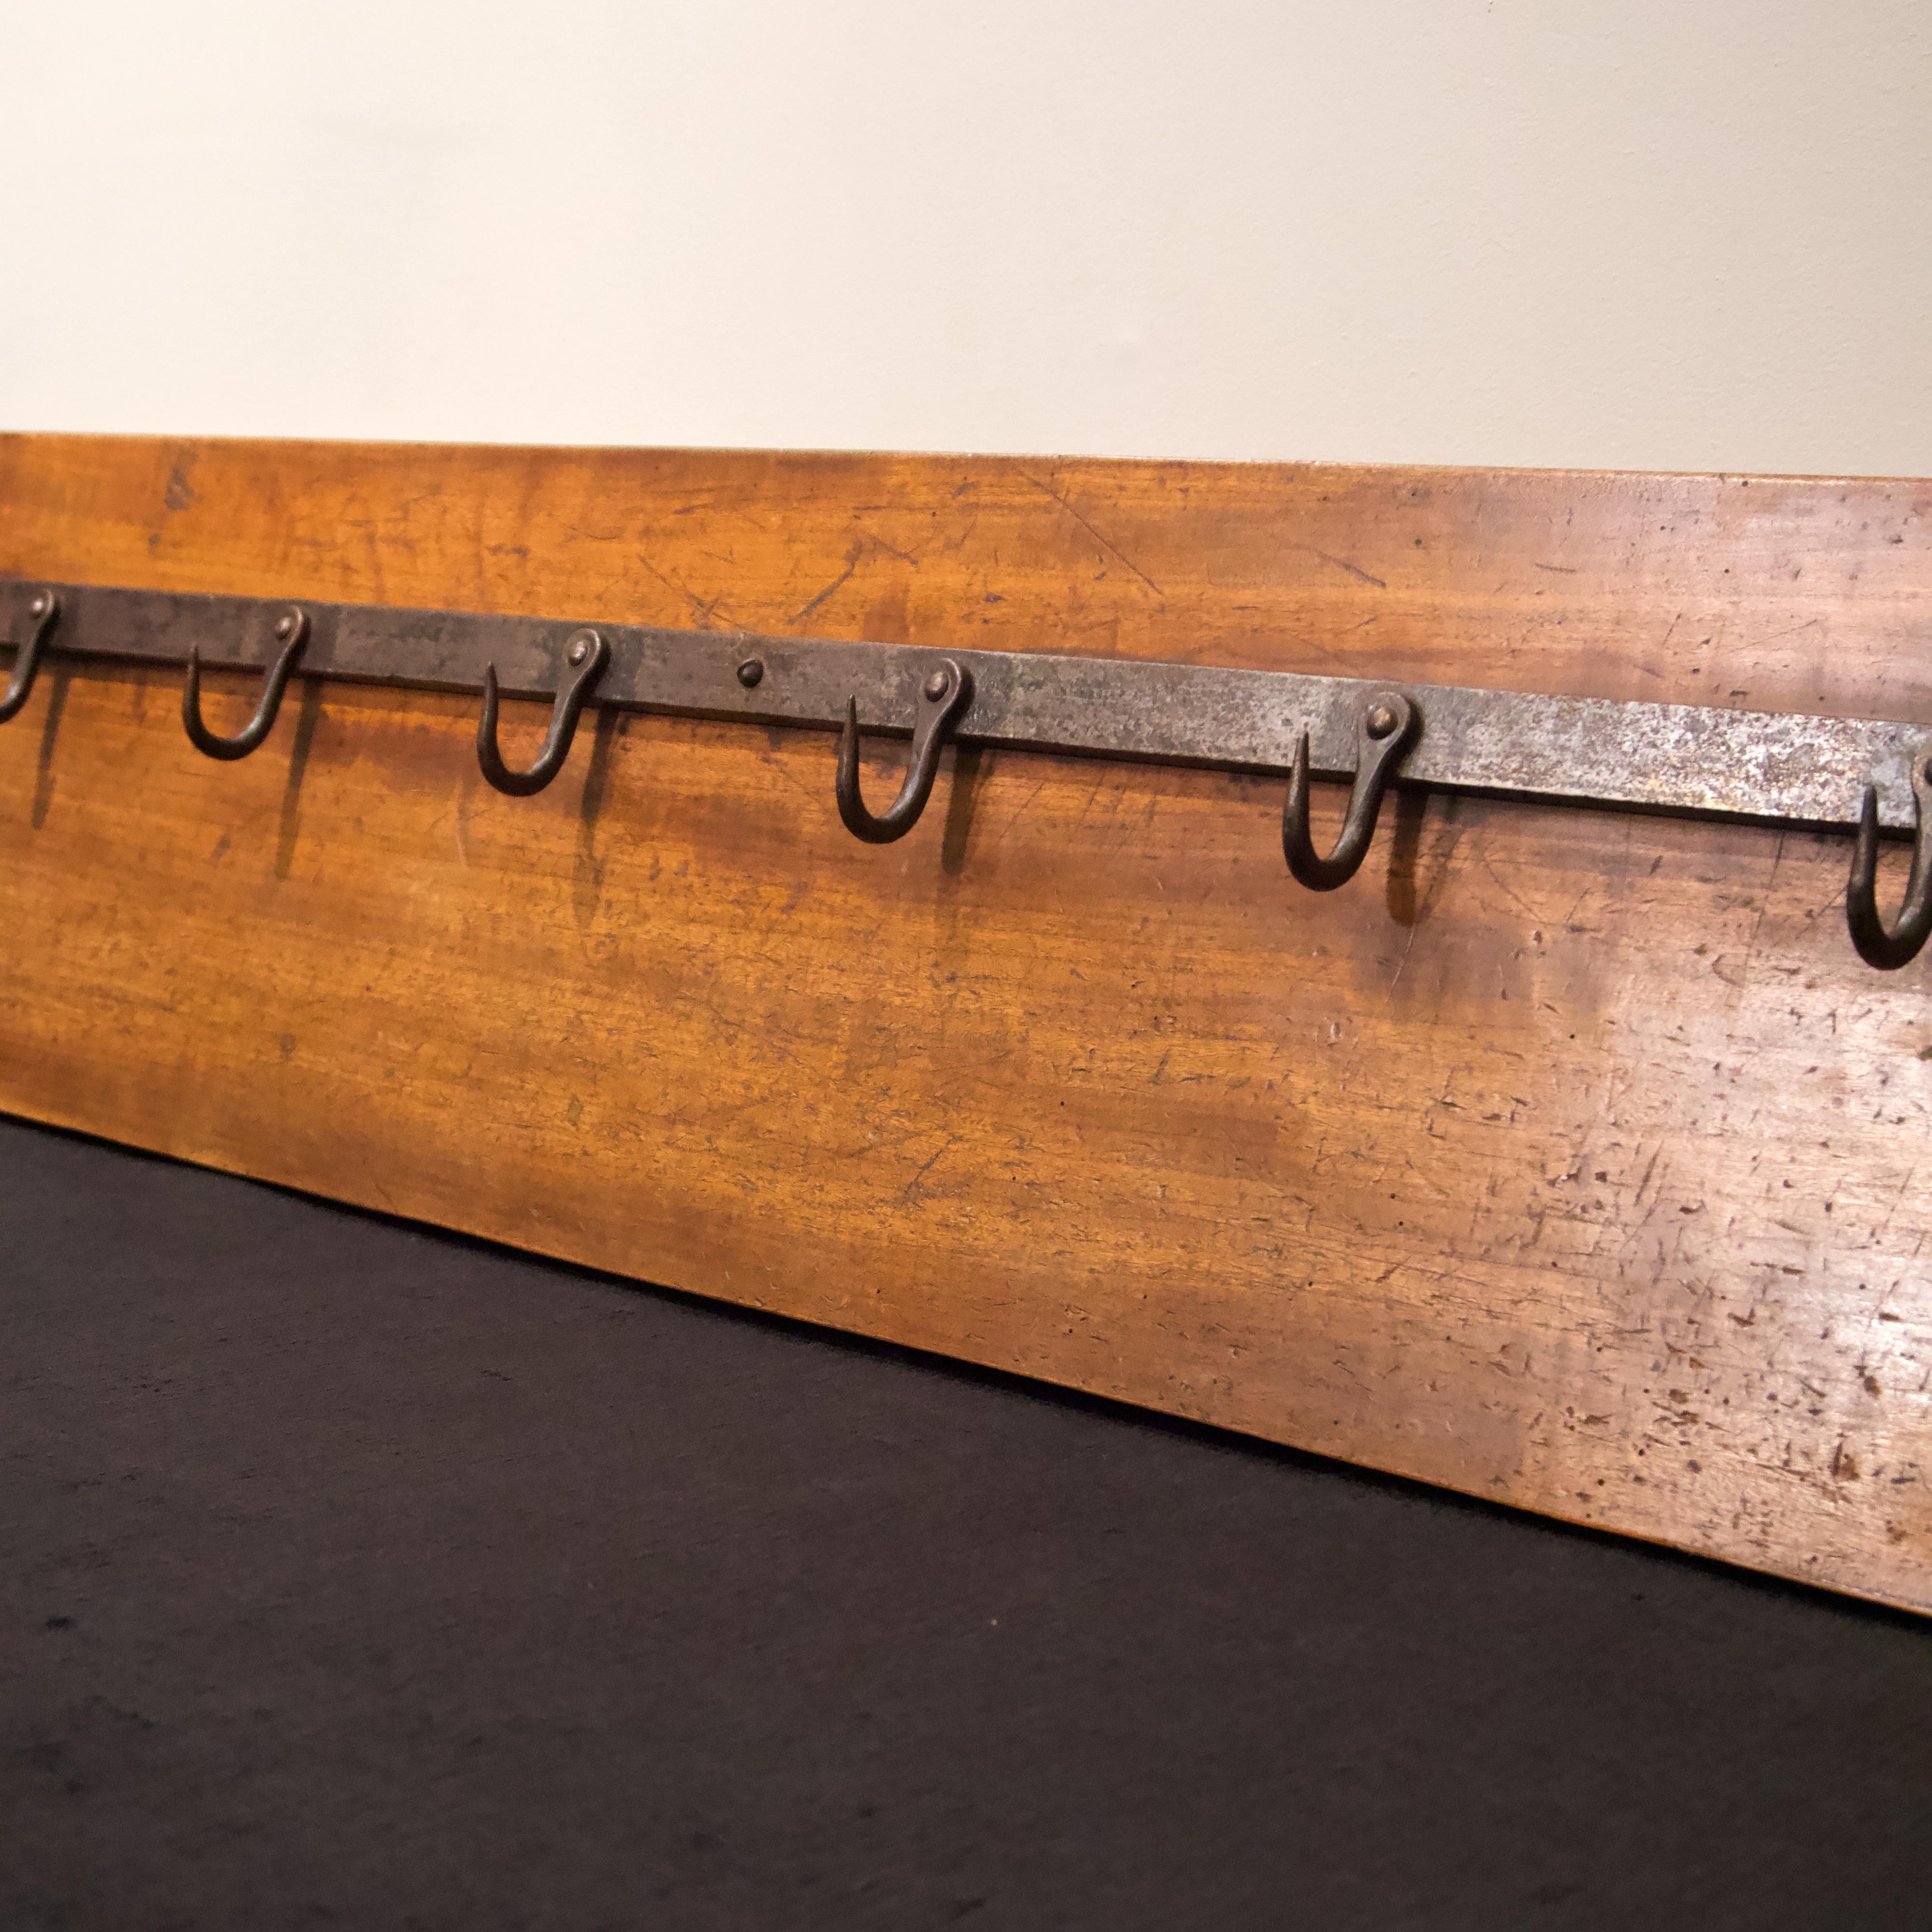 Steel meat hooks, mounted on solid walnut board with mounting (hanging) hardware.